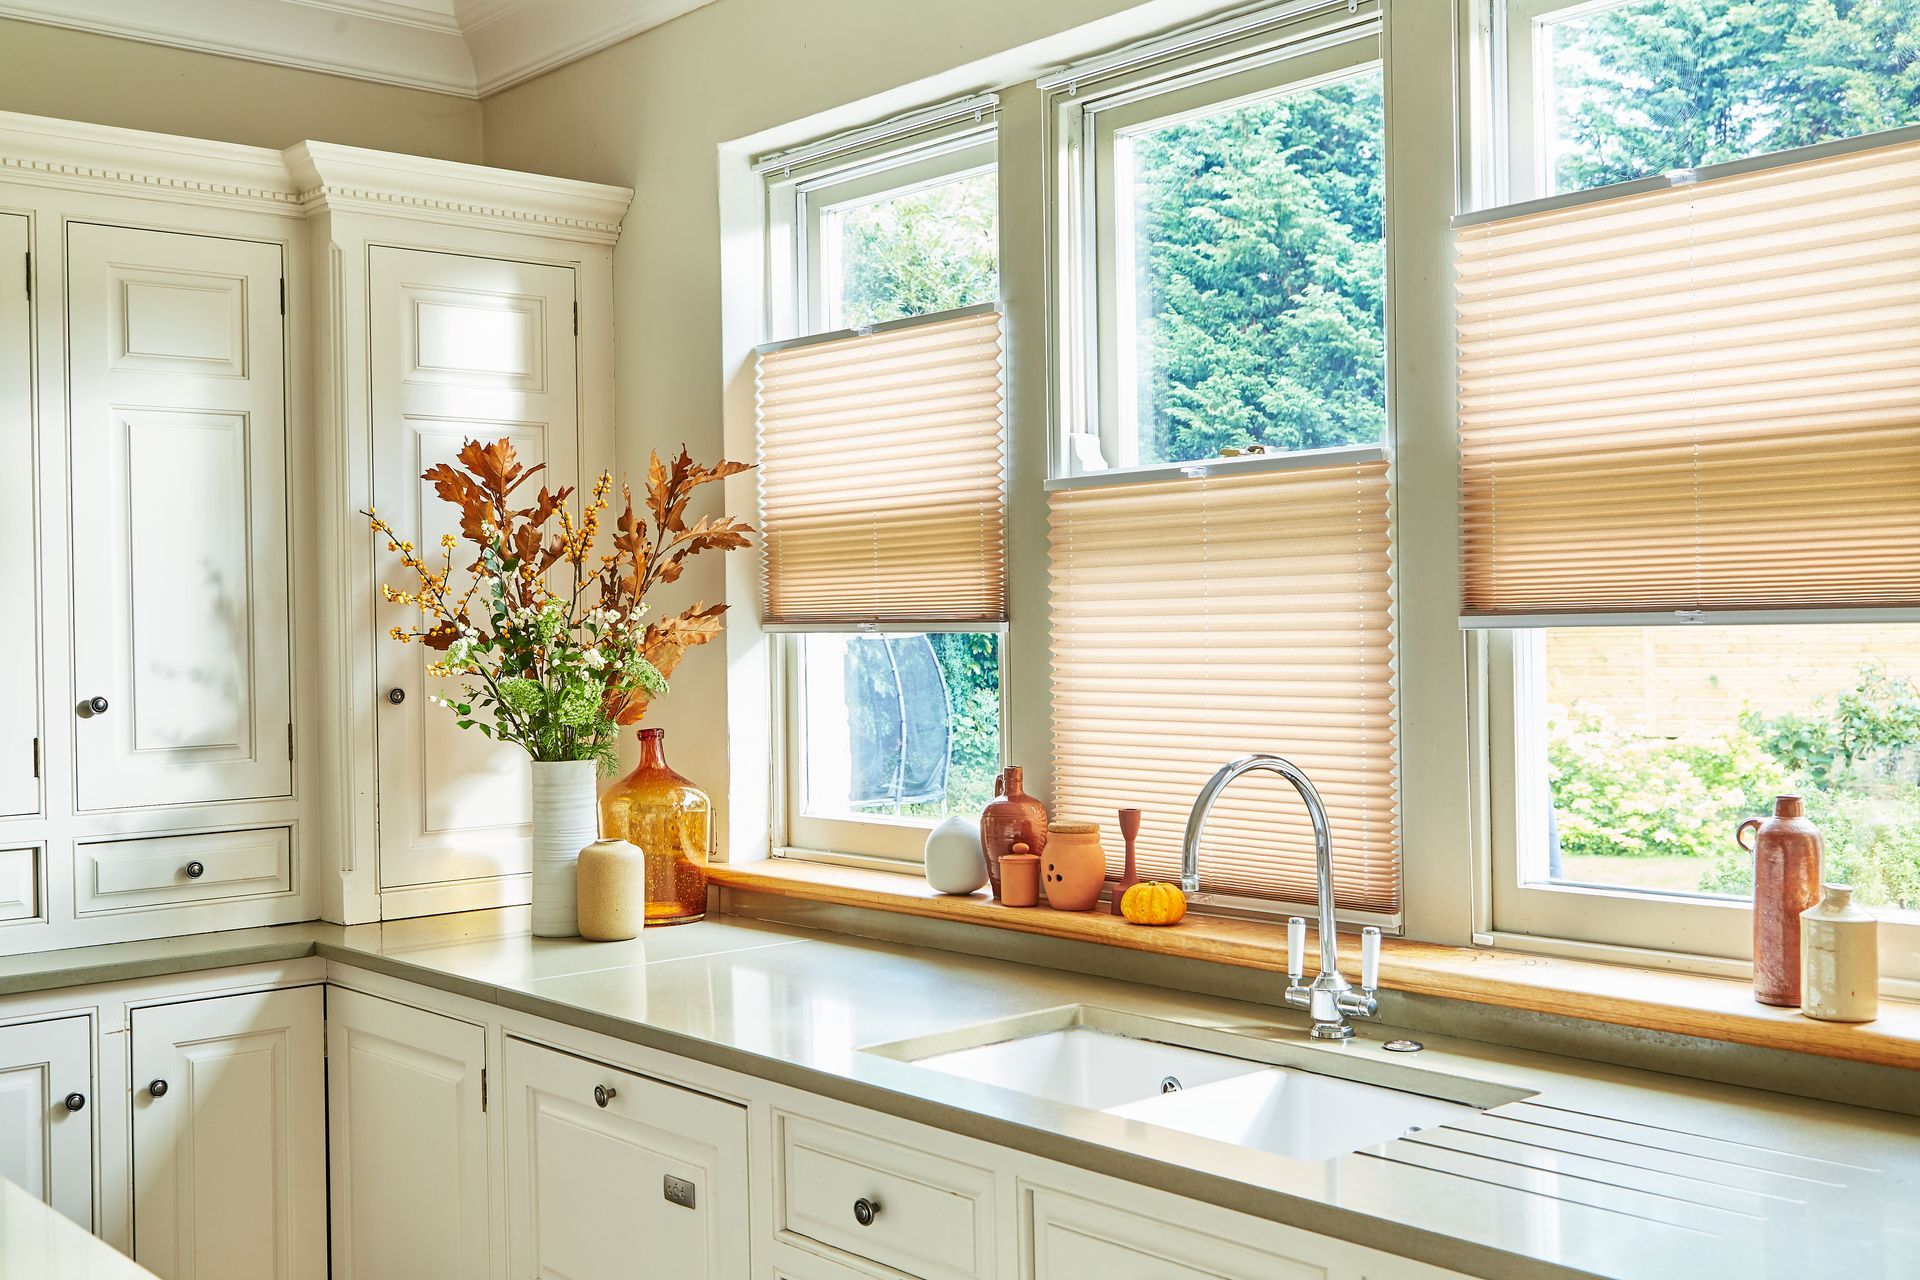 Tensioned pleated blinds